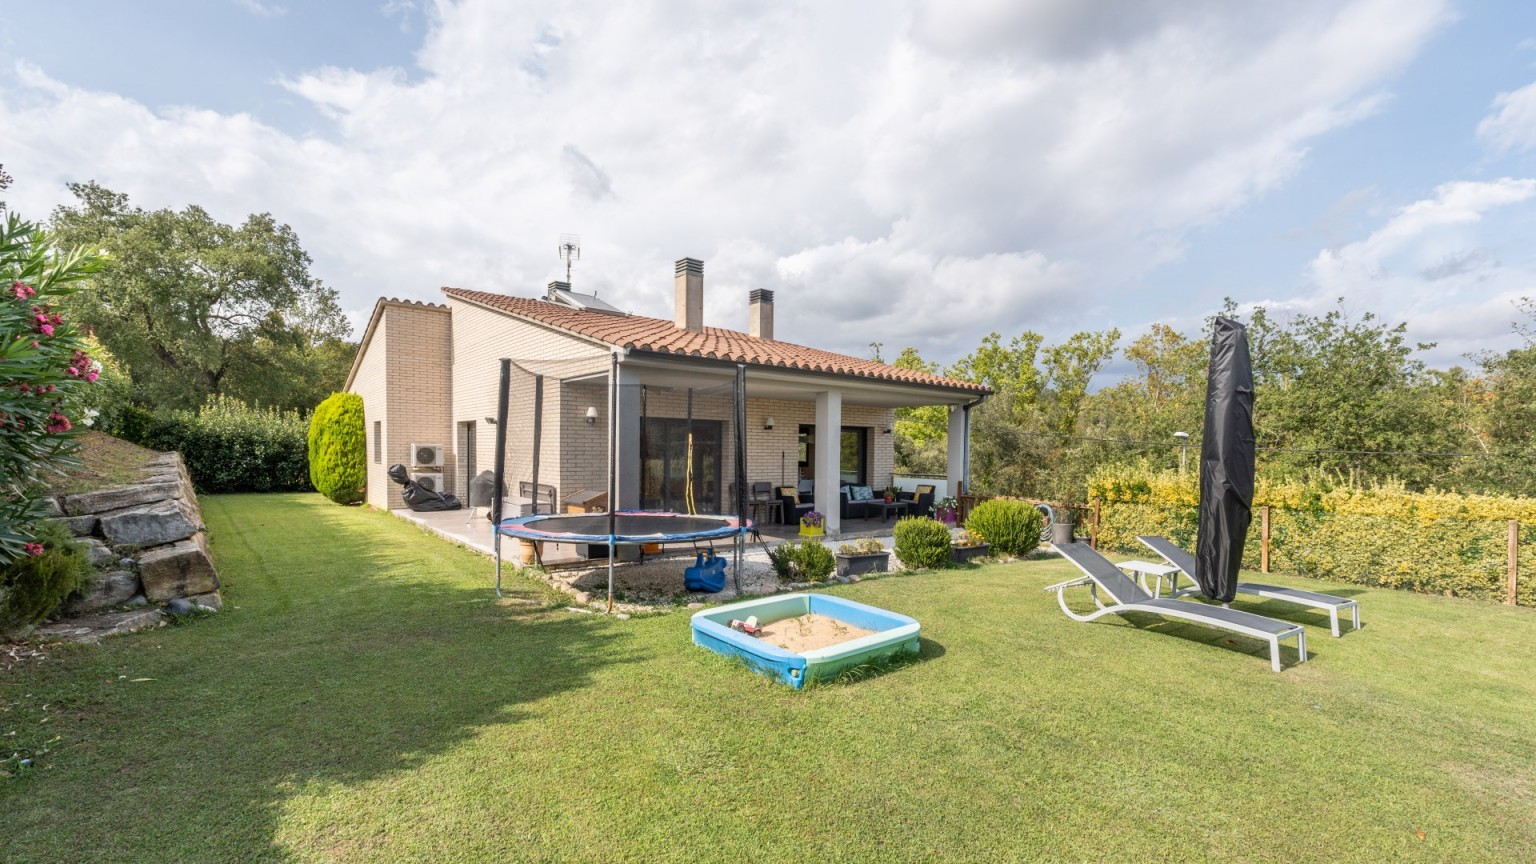 House for sale 20 minutes from Girona. Don't miss it!	